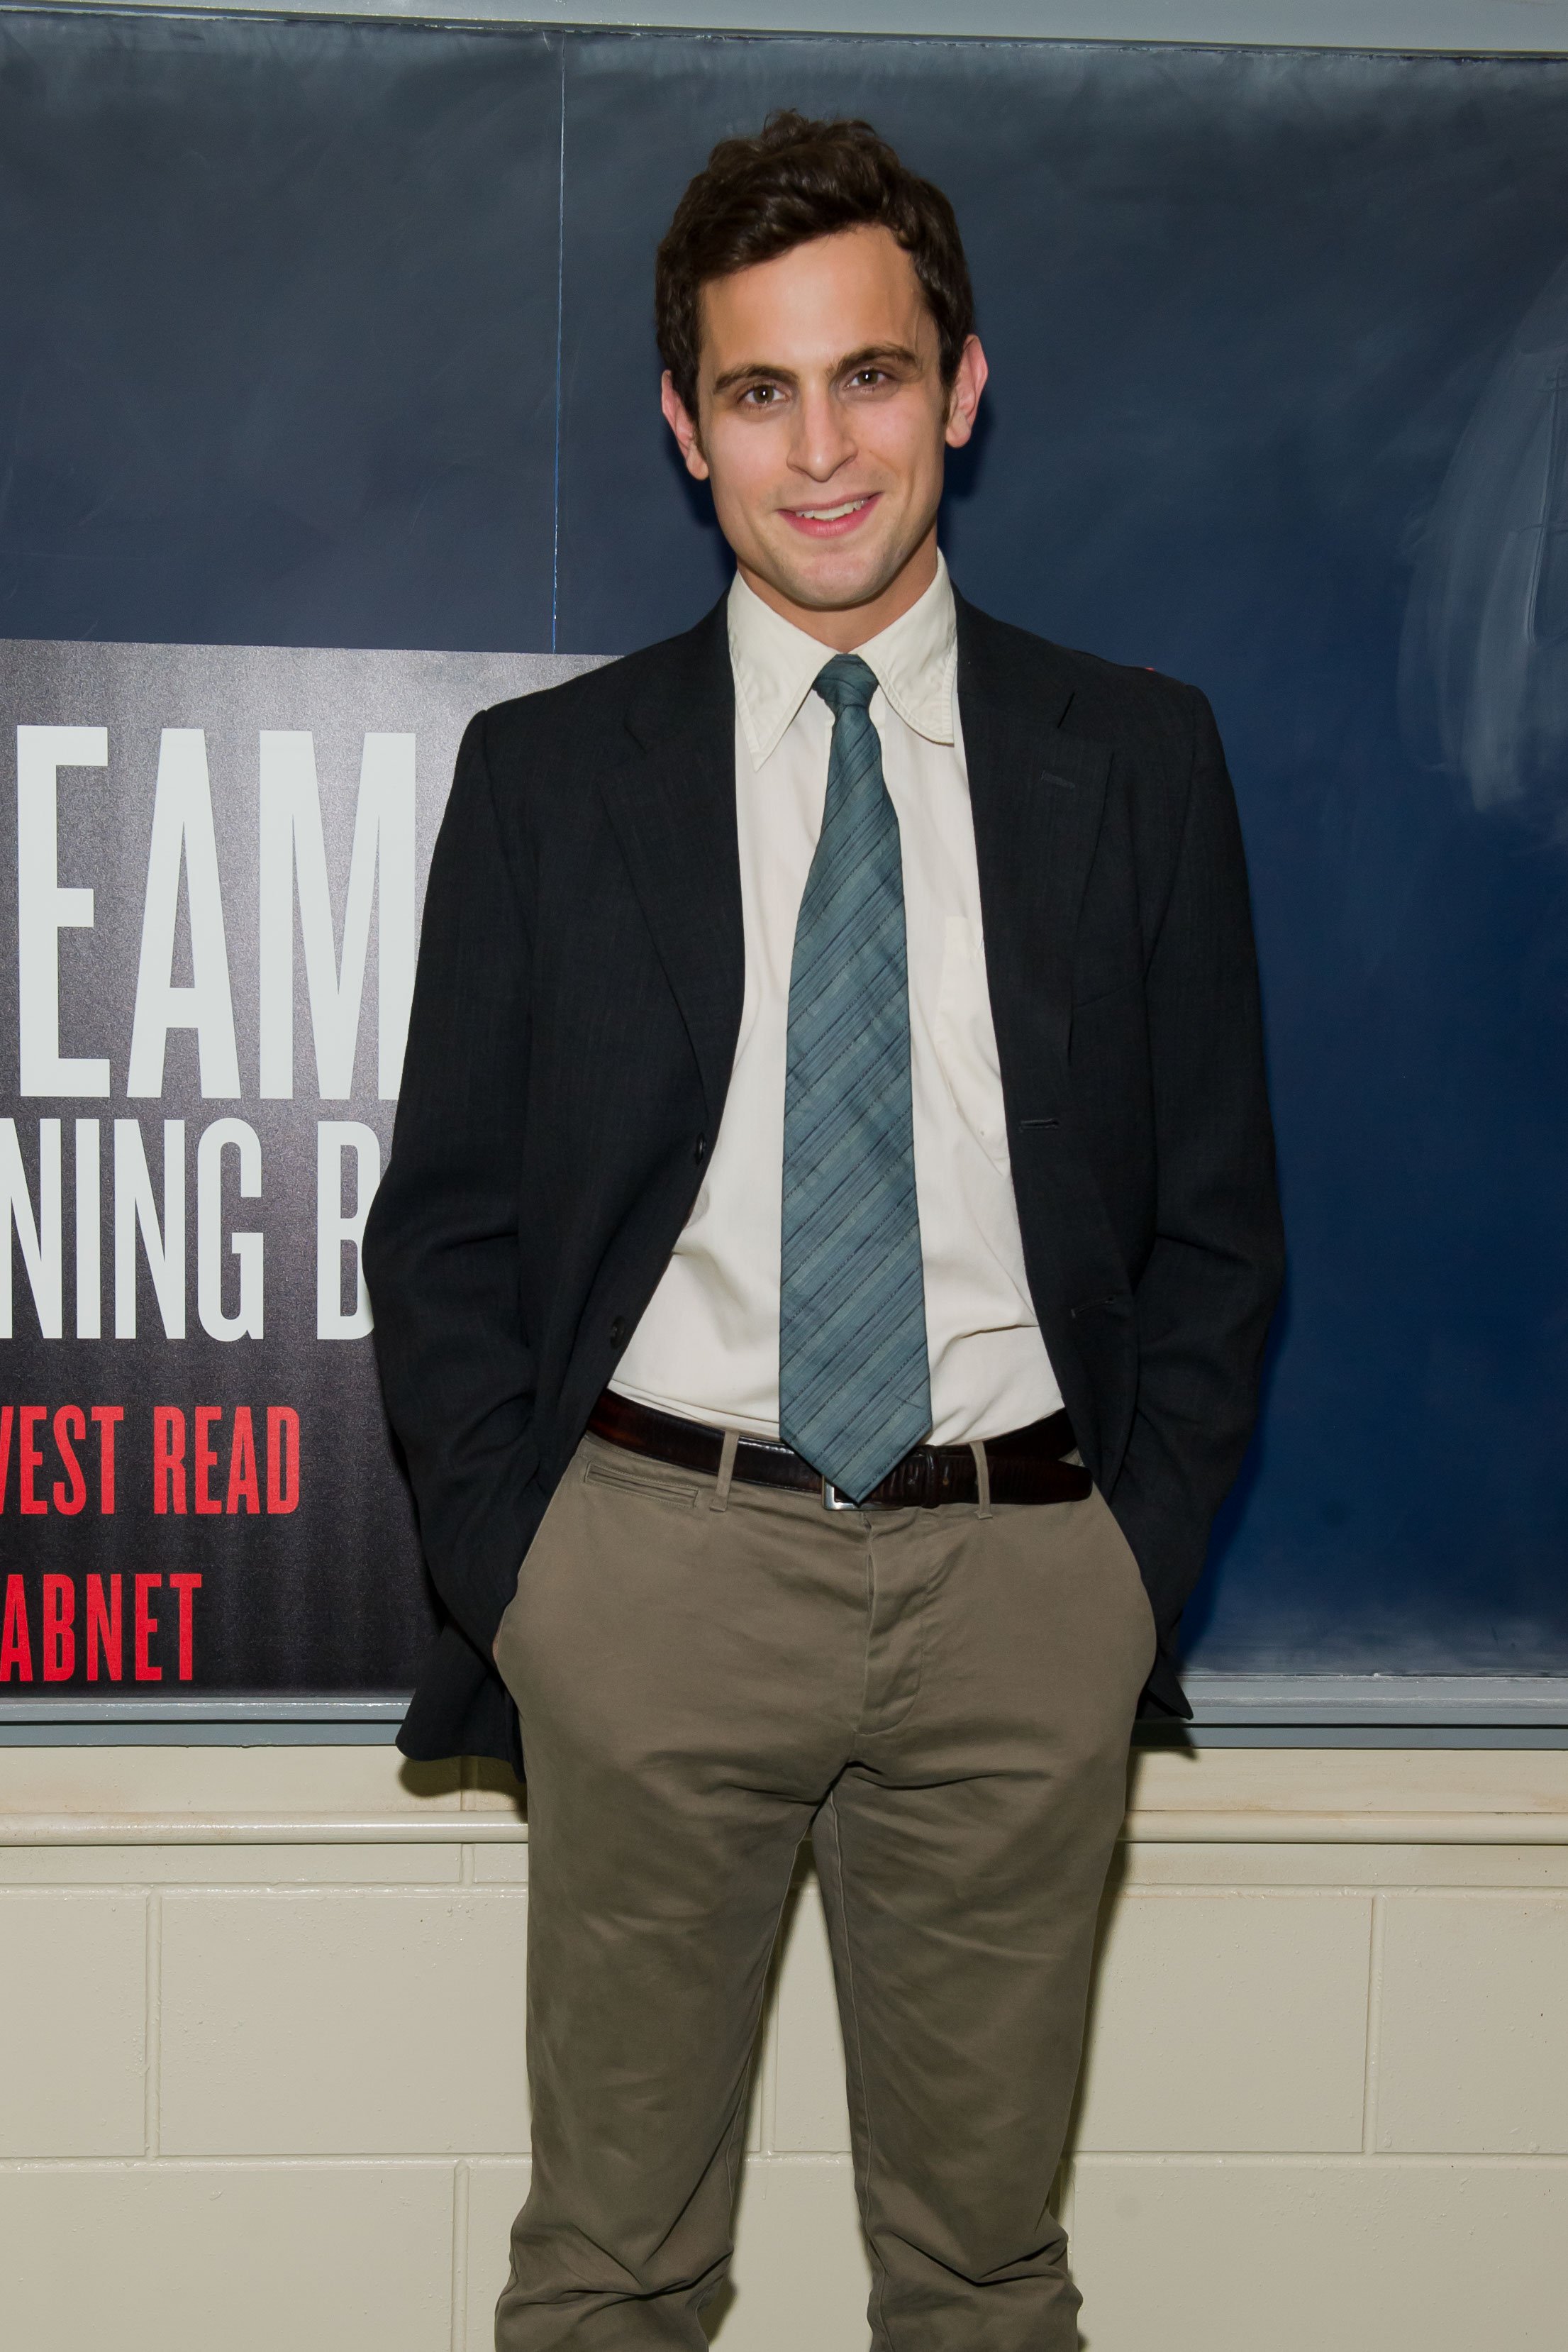  Matt Dellapina attends the opening night of "The Dream of the Burning Boy" at Roundabout Theatre Company Black Box Theatre on March 23, 2011, in New York City. | Source: Getty Images.